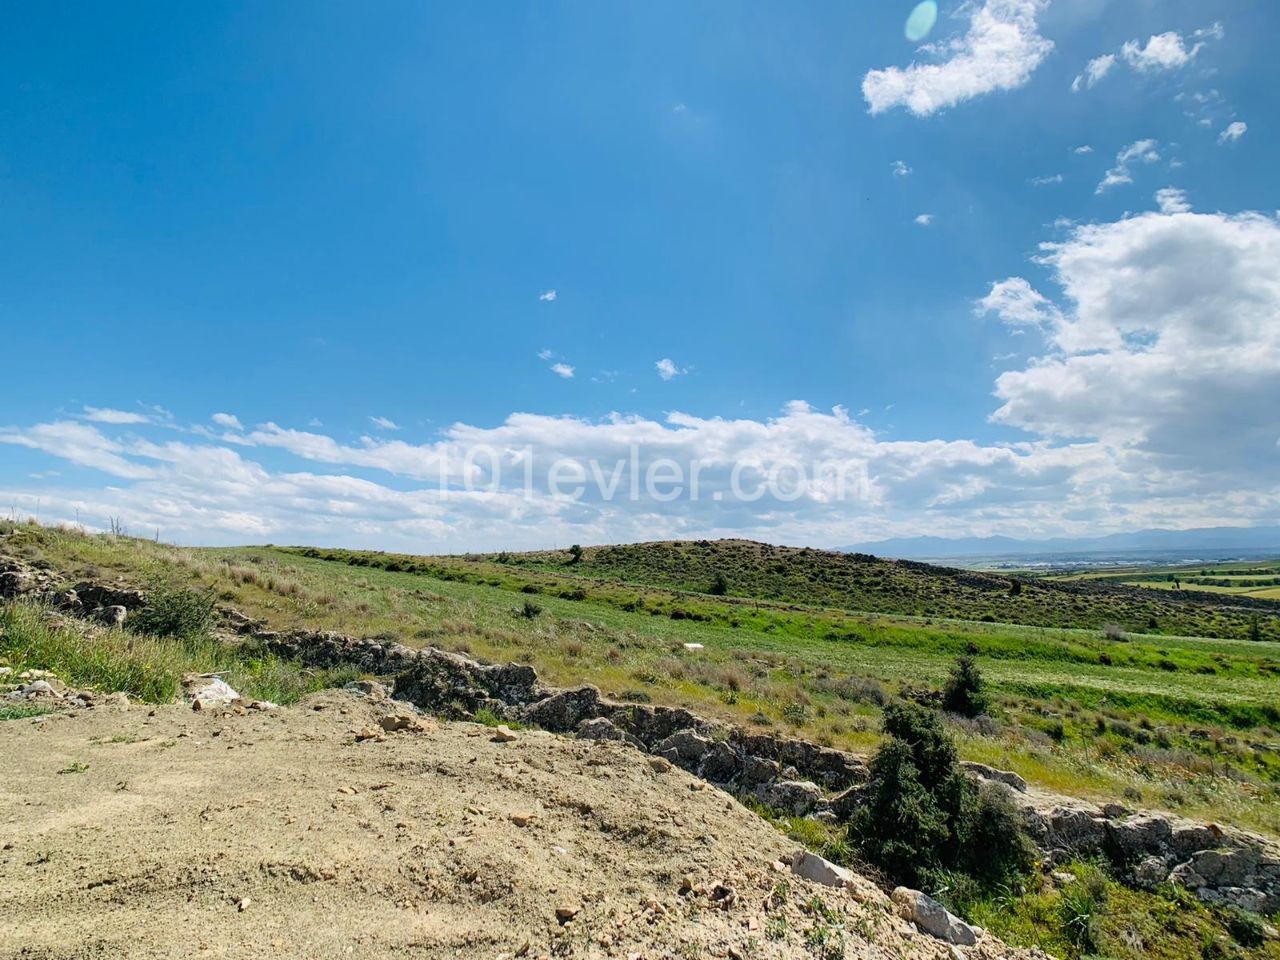 A PLOT of 955m2 Villas with PANORAMIC Views & Will Not be Closed in Front of you in the DECEST Area of NICOSIA-MITRELI! ** 